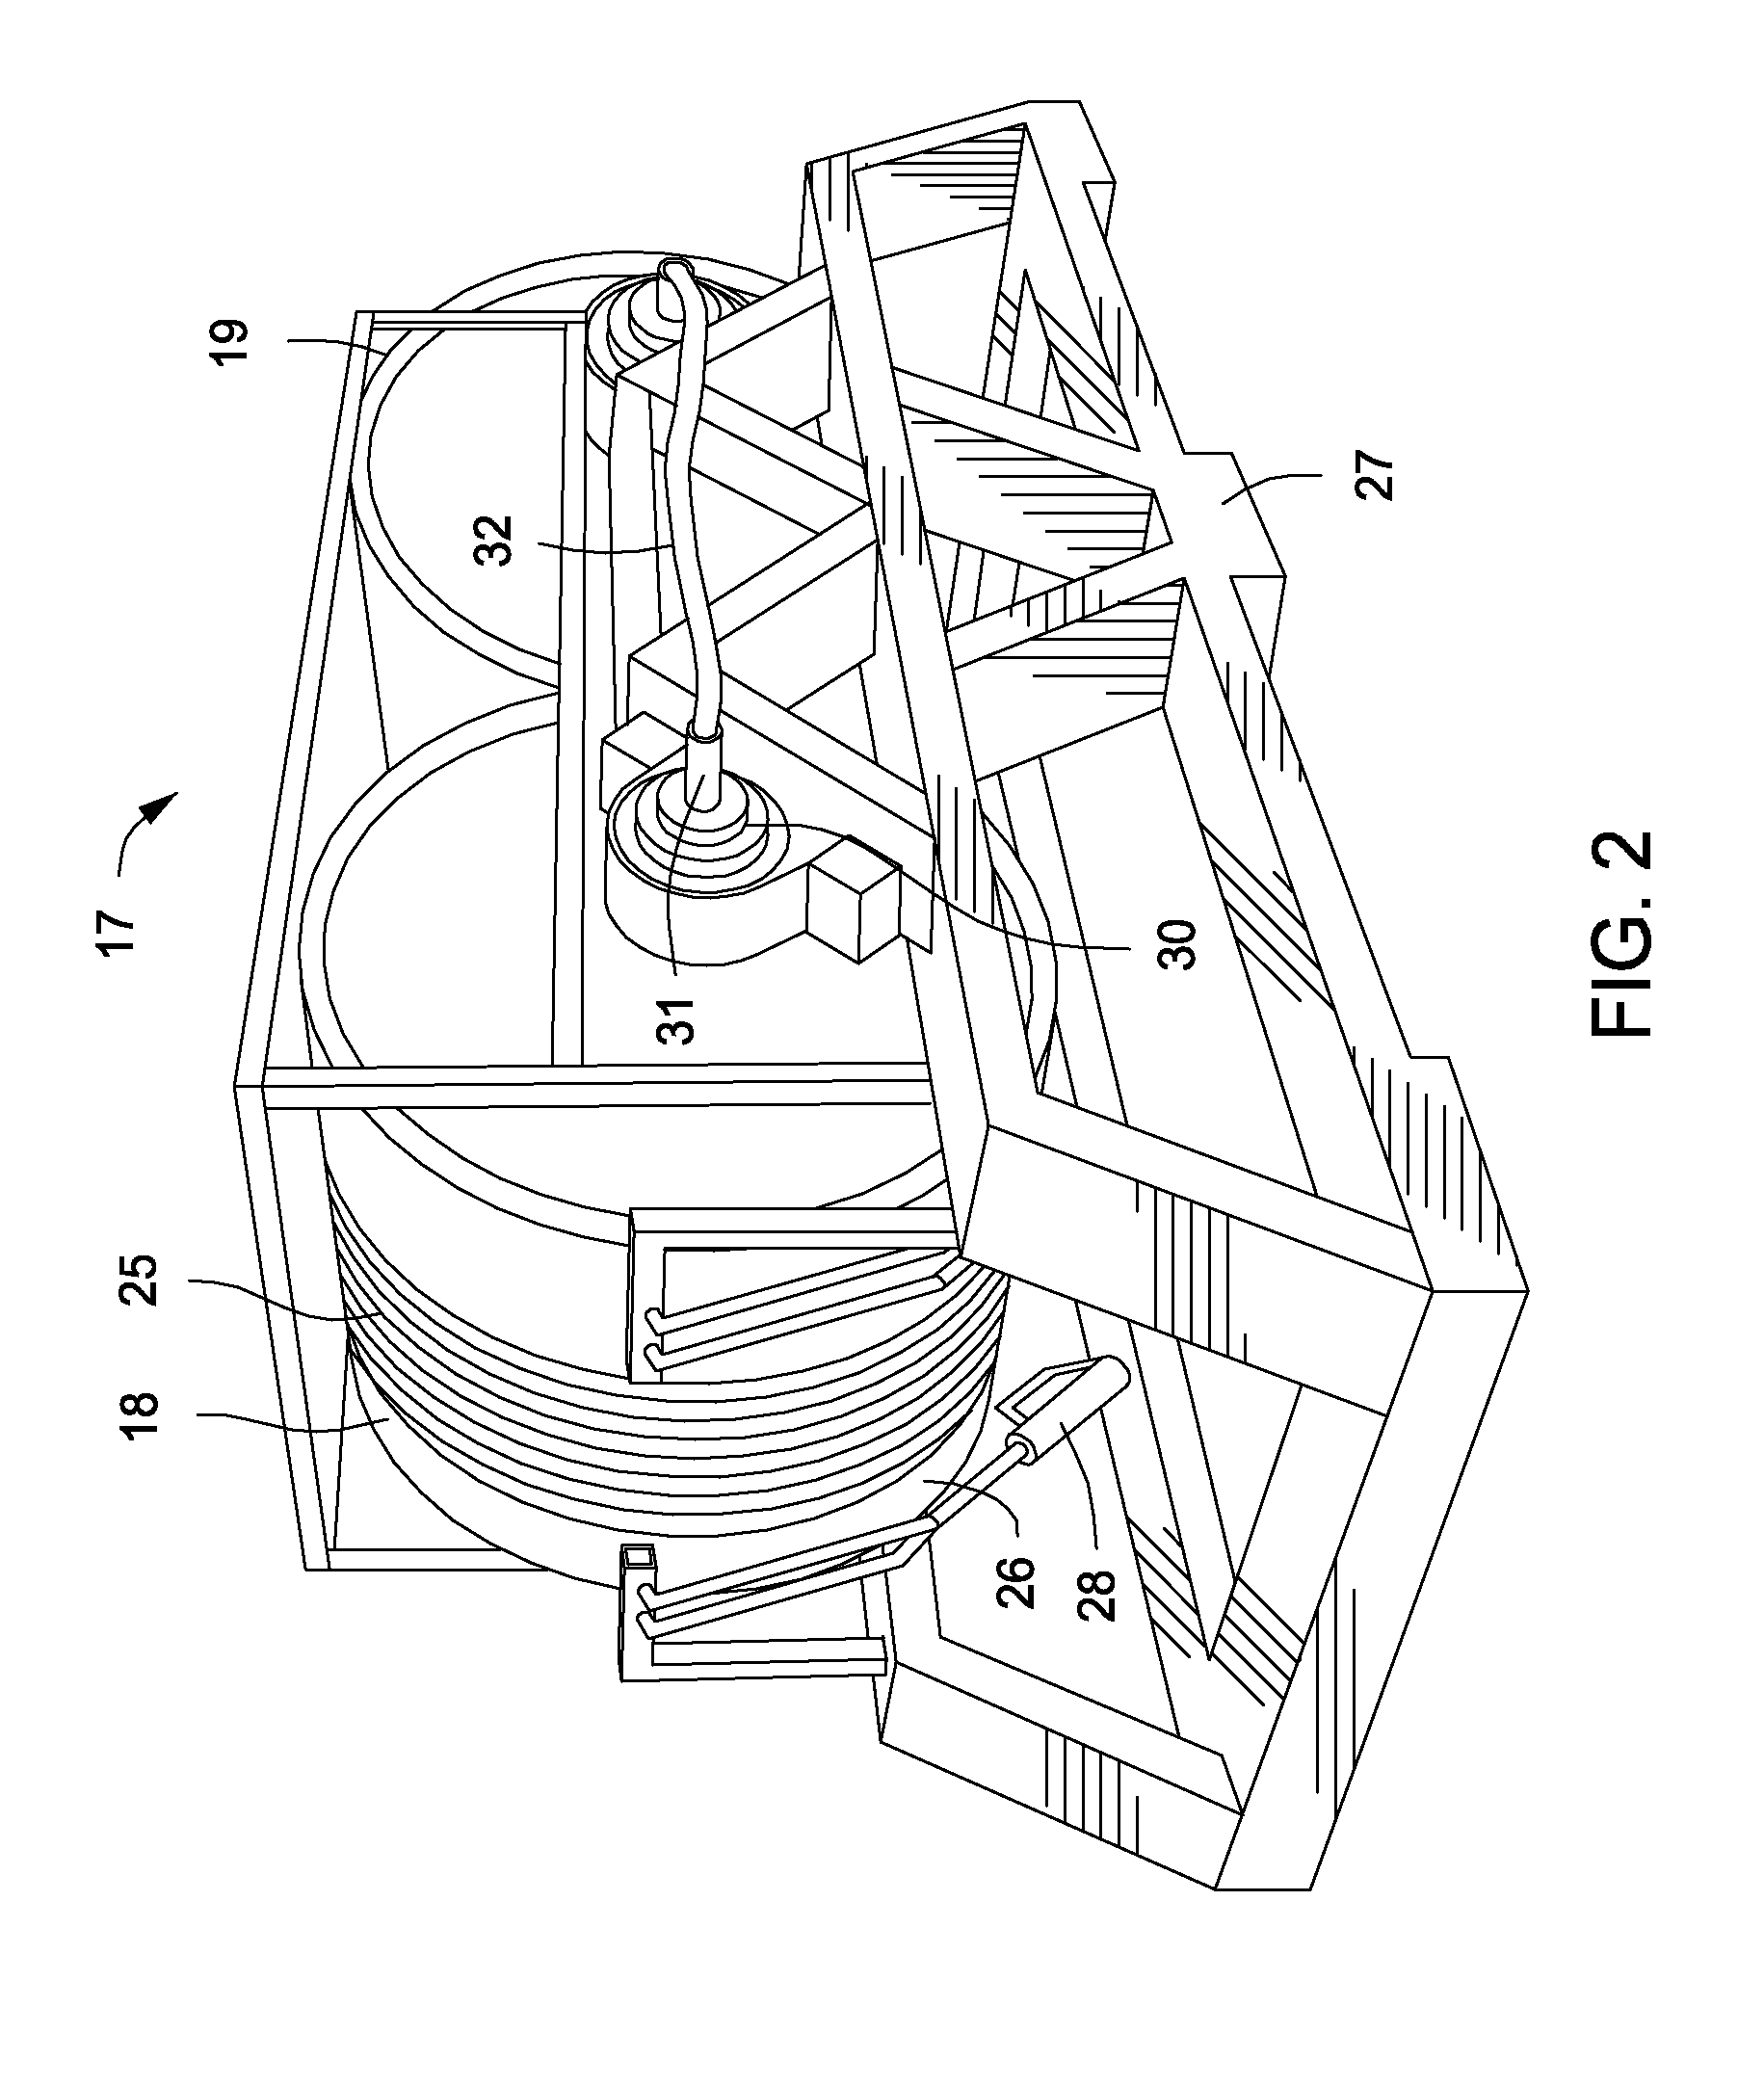 Method and apparatus for treating logging cable